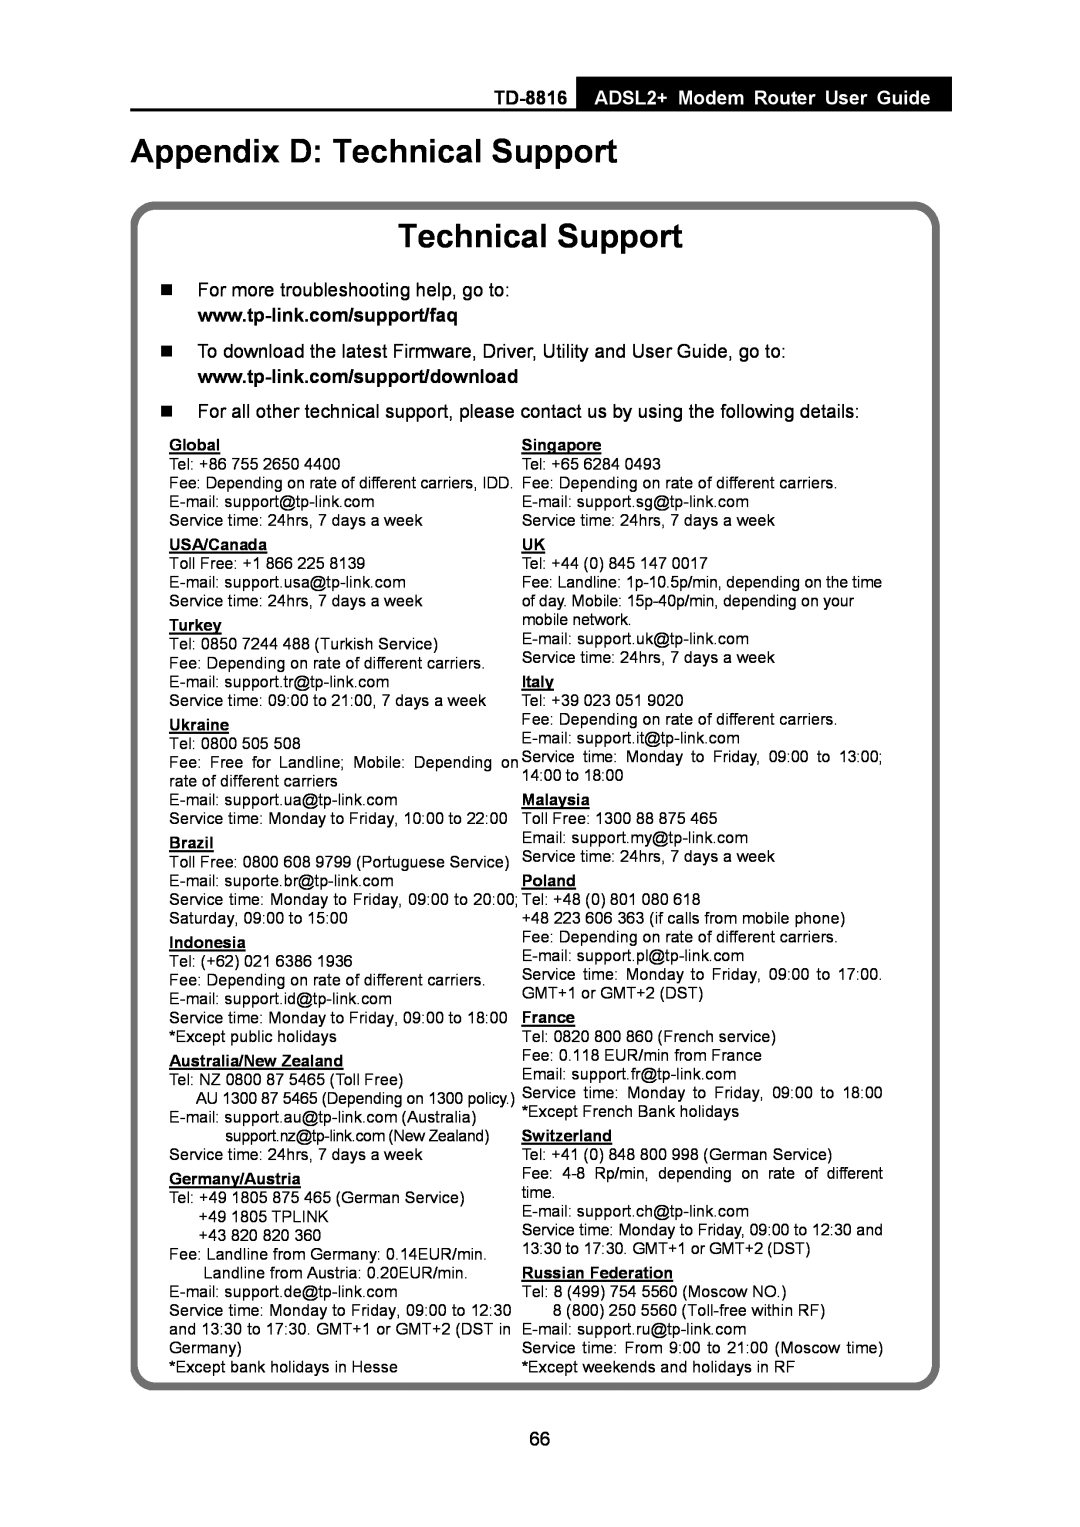 TP-Link TD-8816 manual Appendix D Technical Support Technical Support, ADSL2+ Modem Router User Guide 